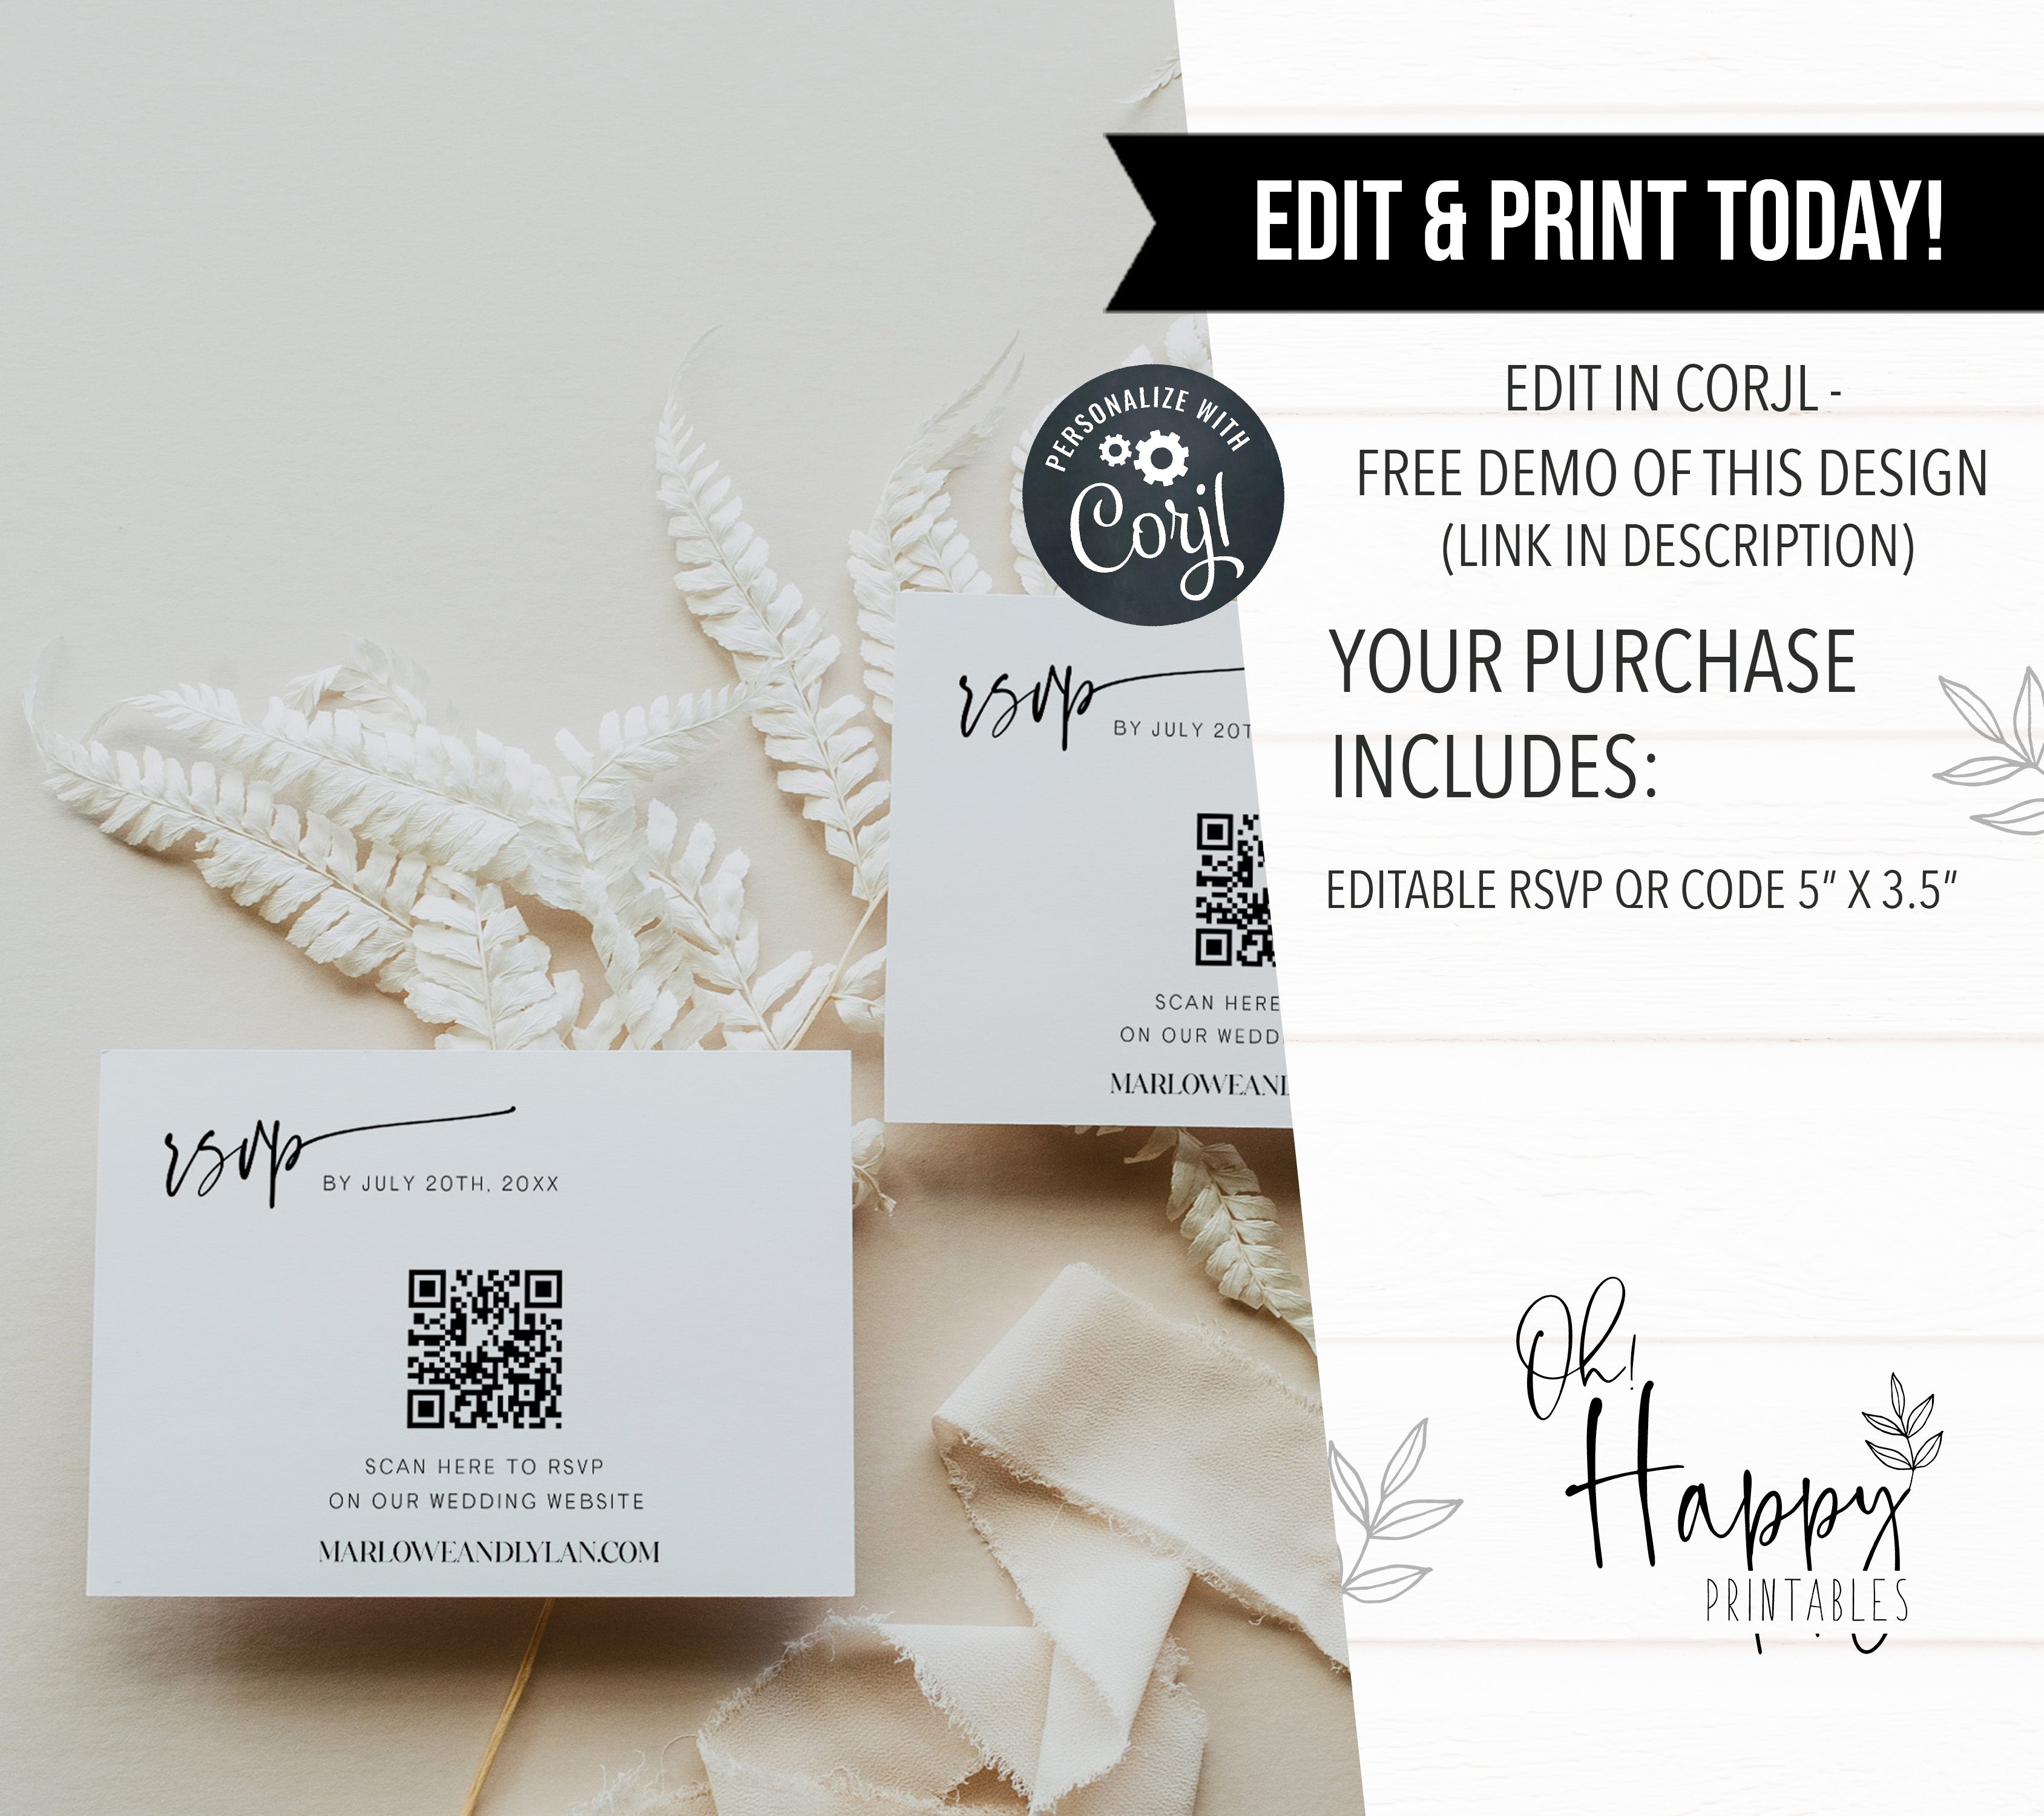 Modern Thank You For Shopping Small Branding Business Card